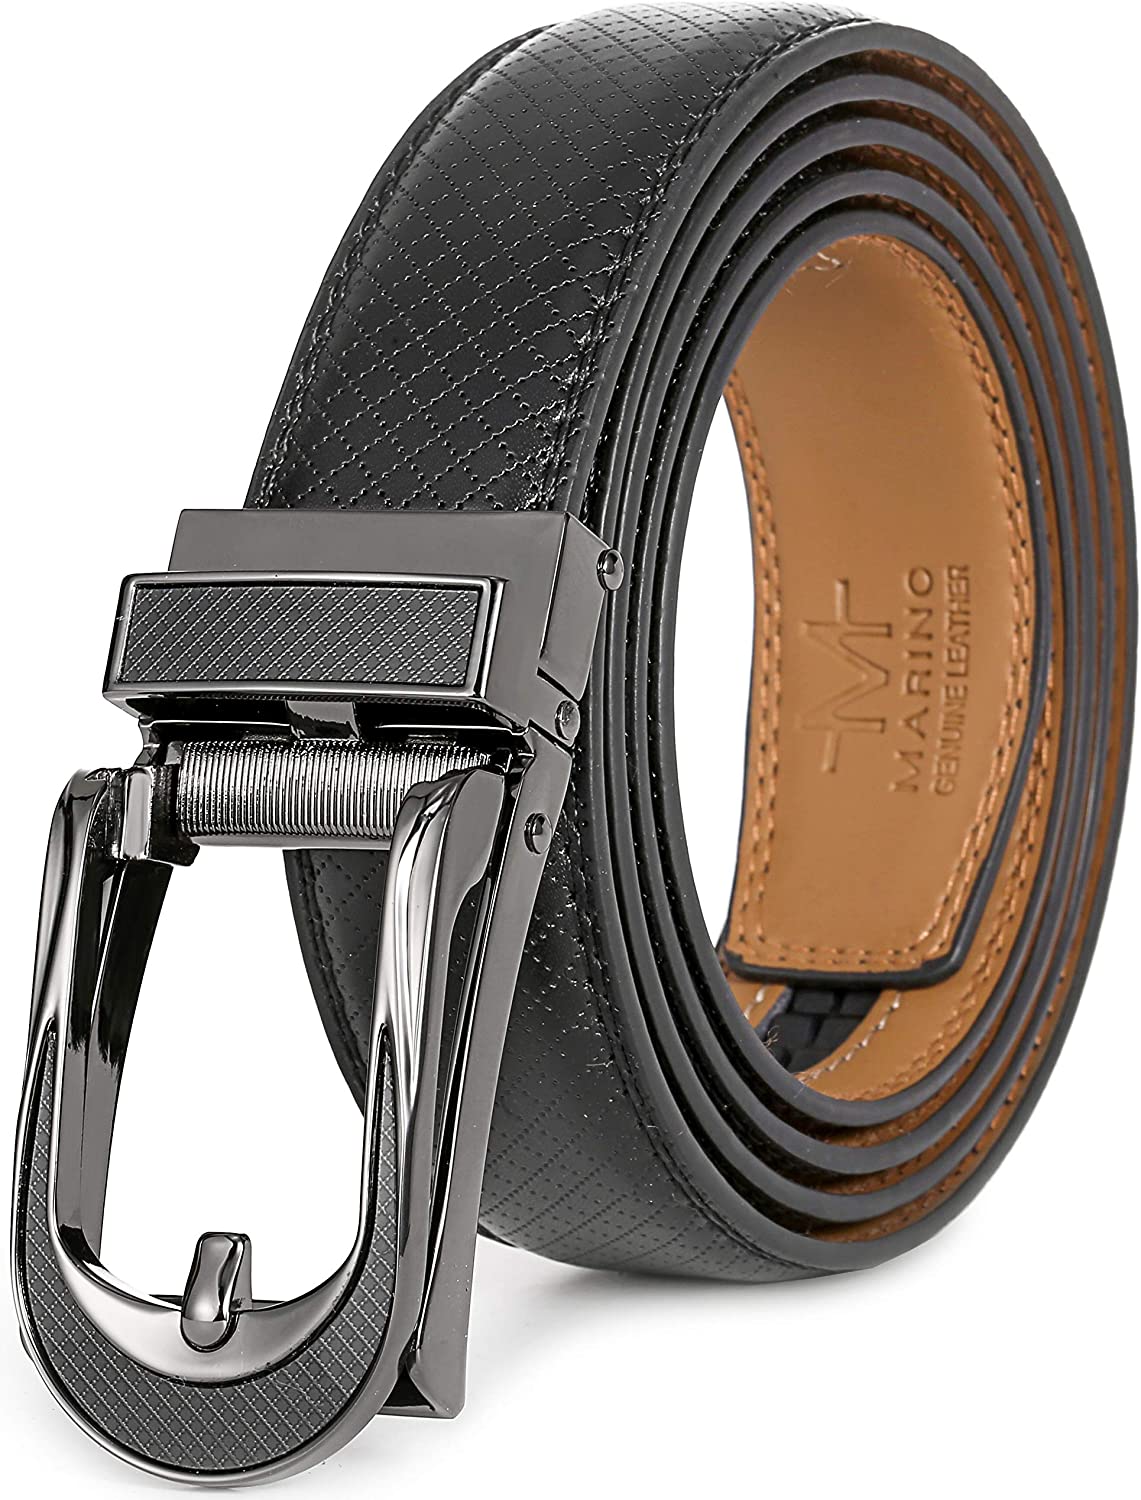 Enclosed Marino Men’s Genuine Leather Ratchet Dress Belt with Open Linxx Buckle 